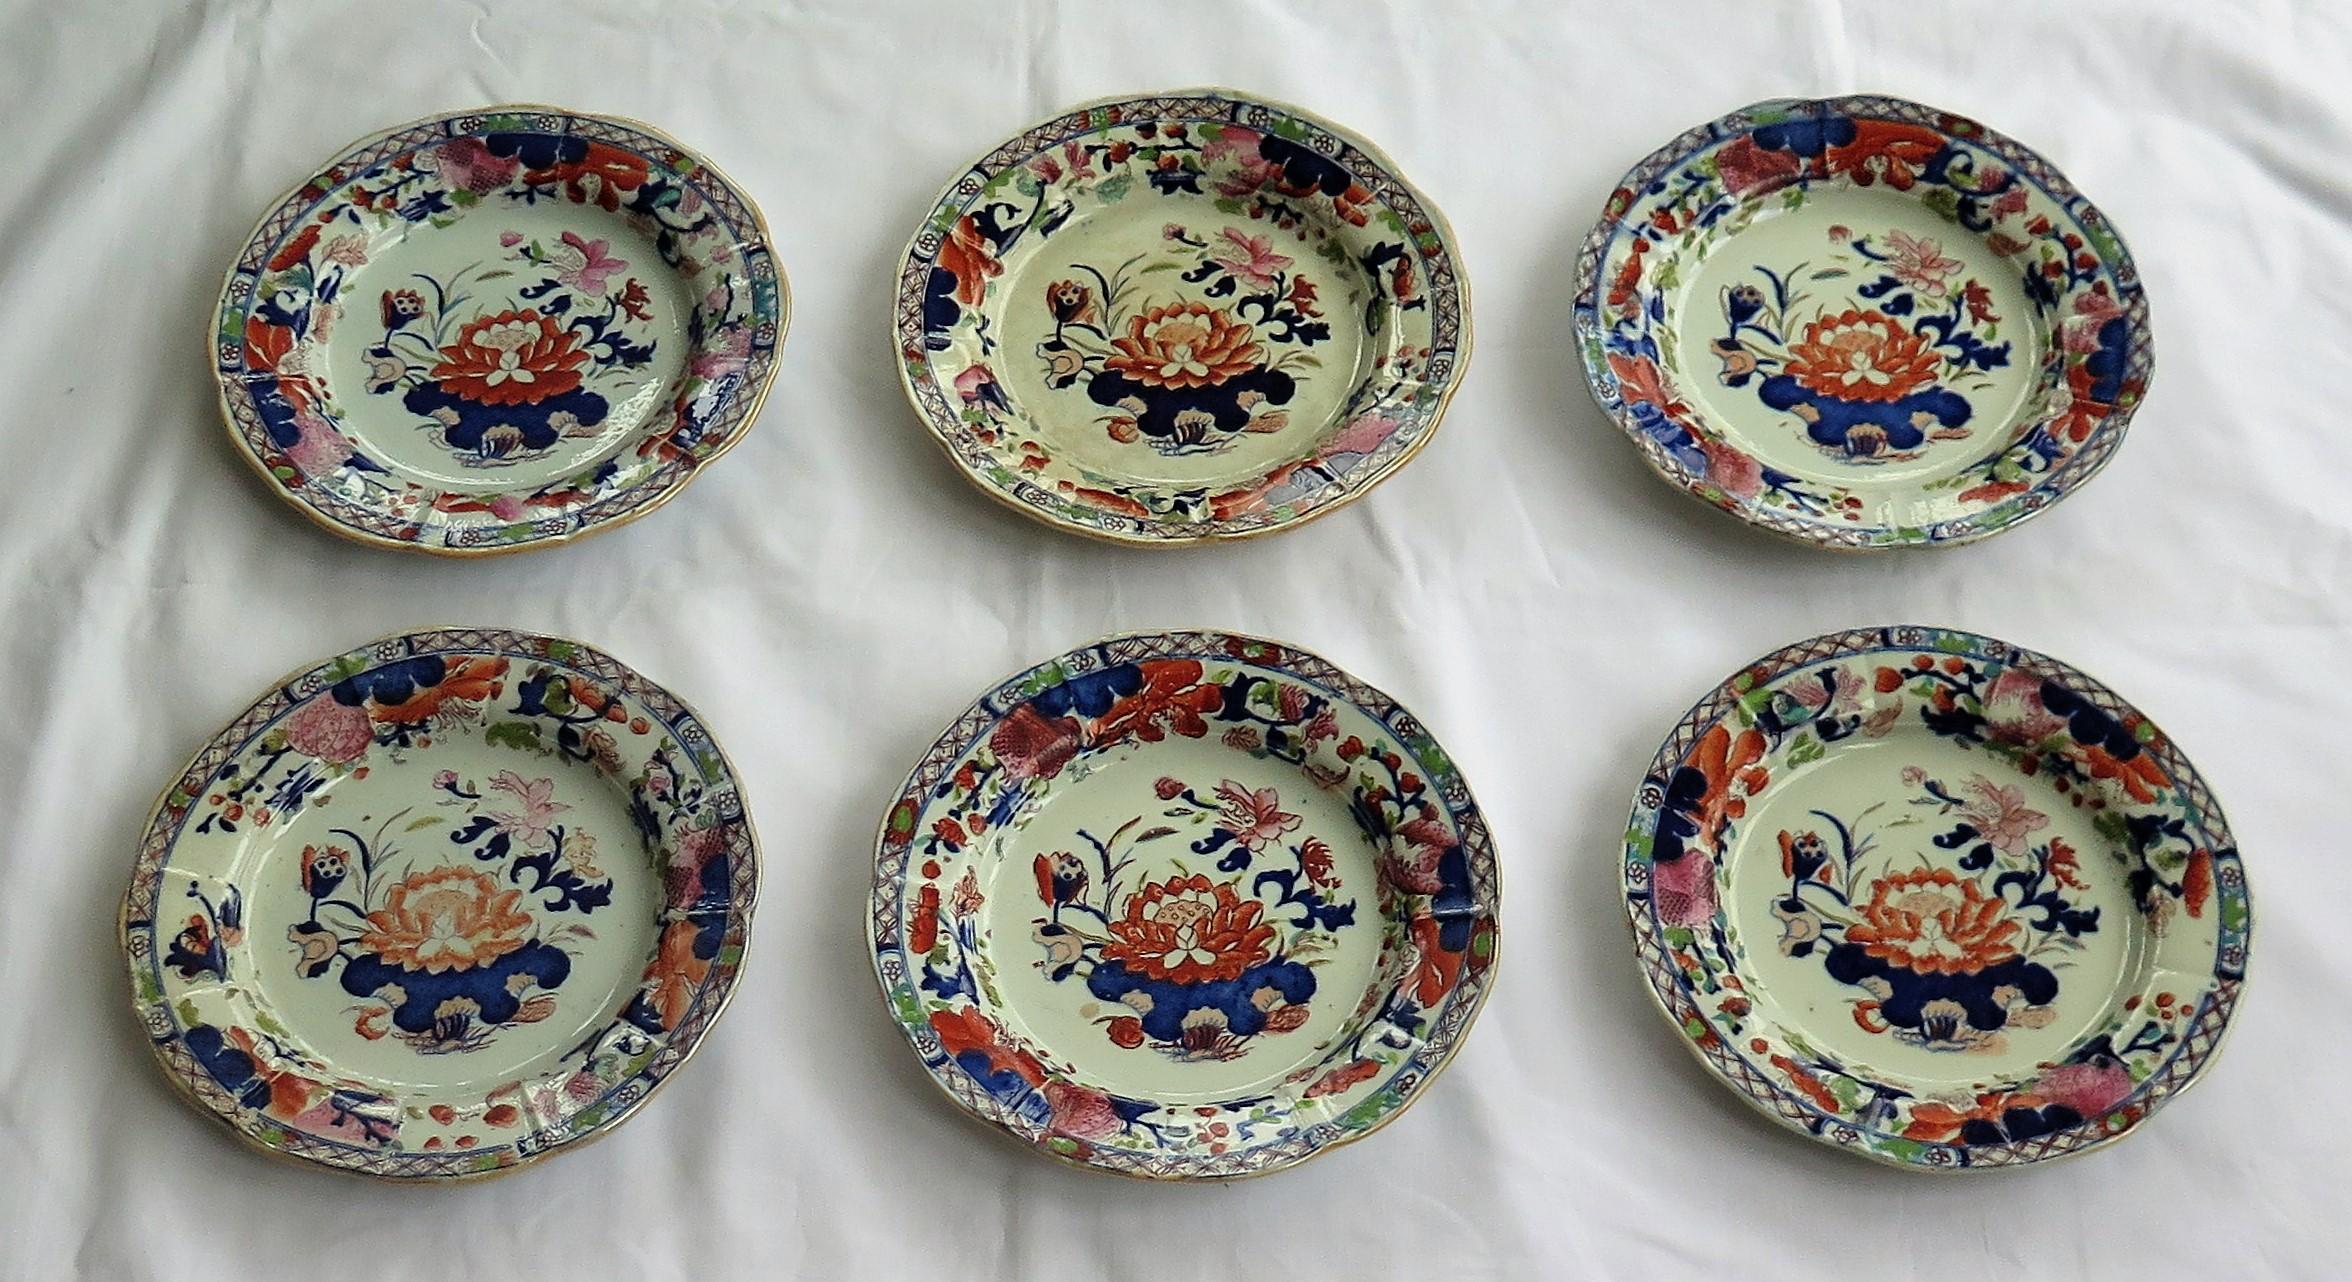 These are a good set of six very decorative Mason's Ironstone pottery desert plates or dishes in the Water Lily pattern, produced by the Mason's factory at Lane Delph, Staffordshire, England, during the George 111rd period, circa 1815-1820.

The